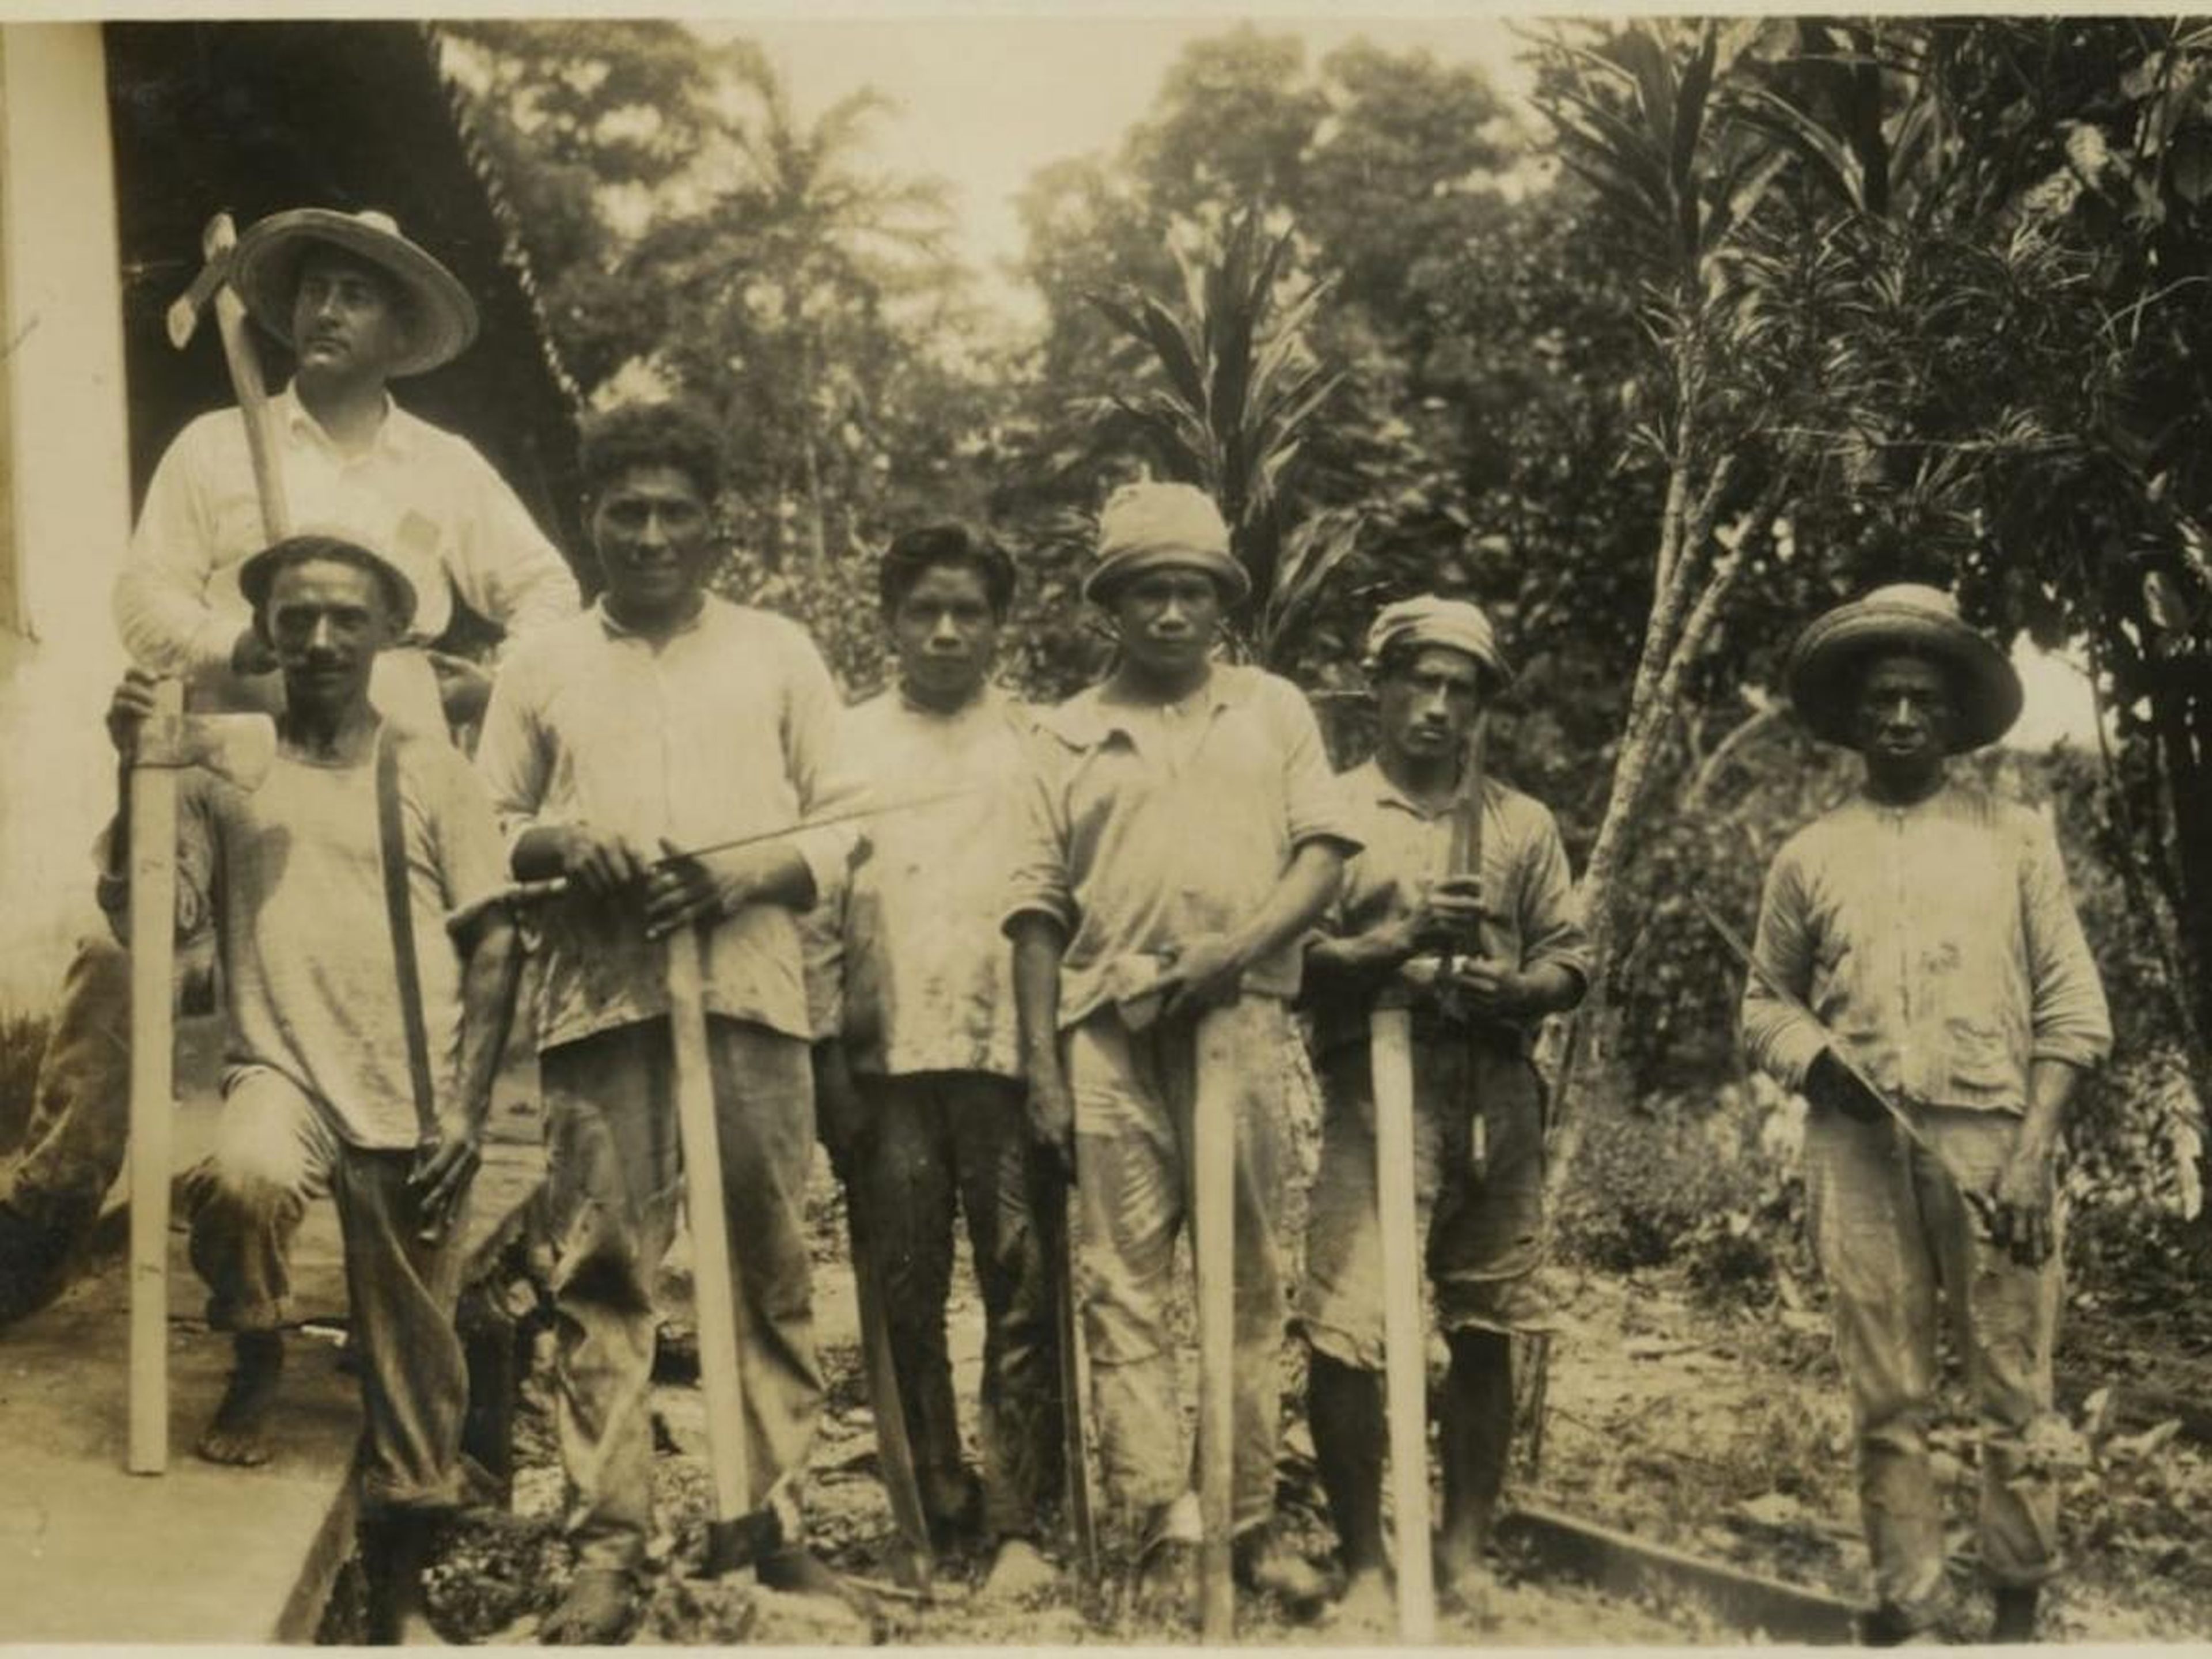 Native Brazilians were also among those hired in Fordlandia to work in the factories.